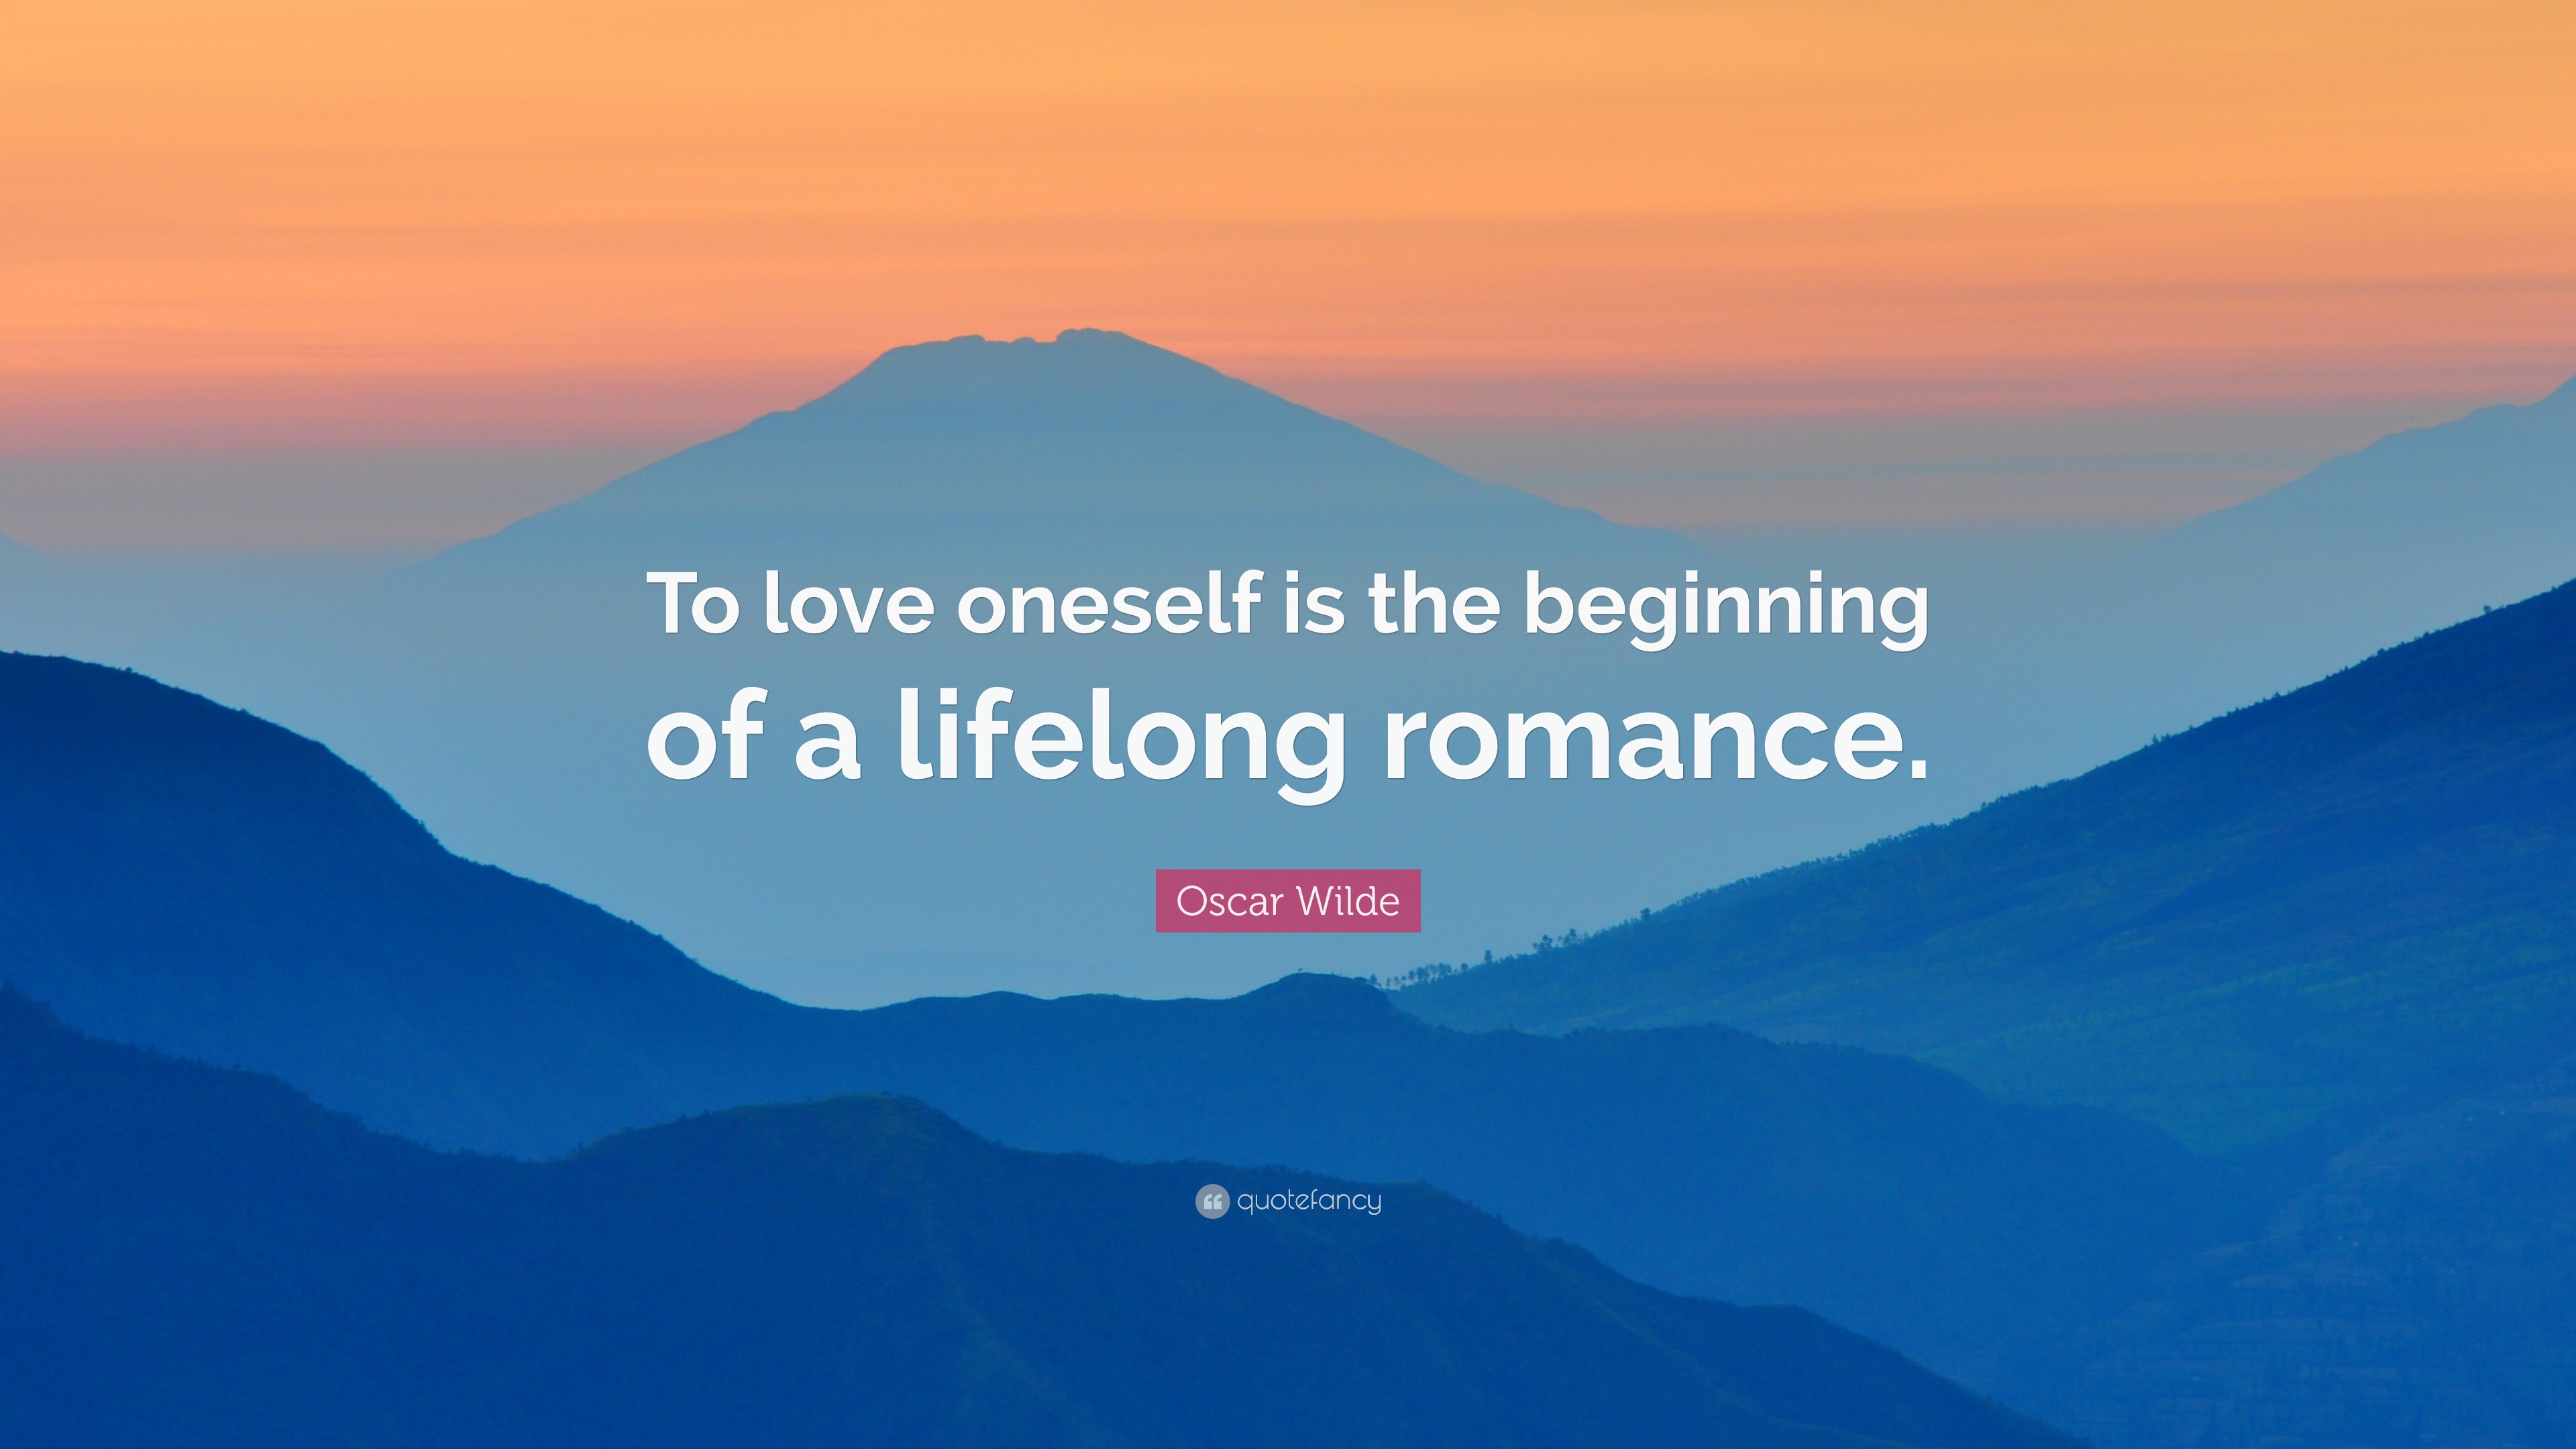 Oscar Wilde Quote: “To love oneself is the beginning of a lifelong